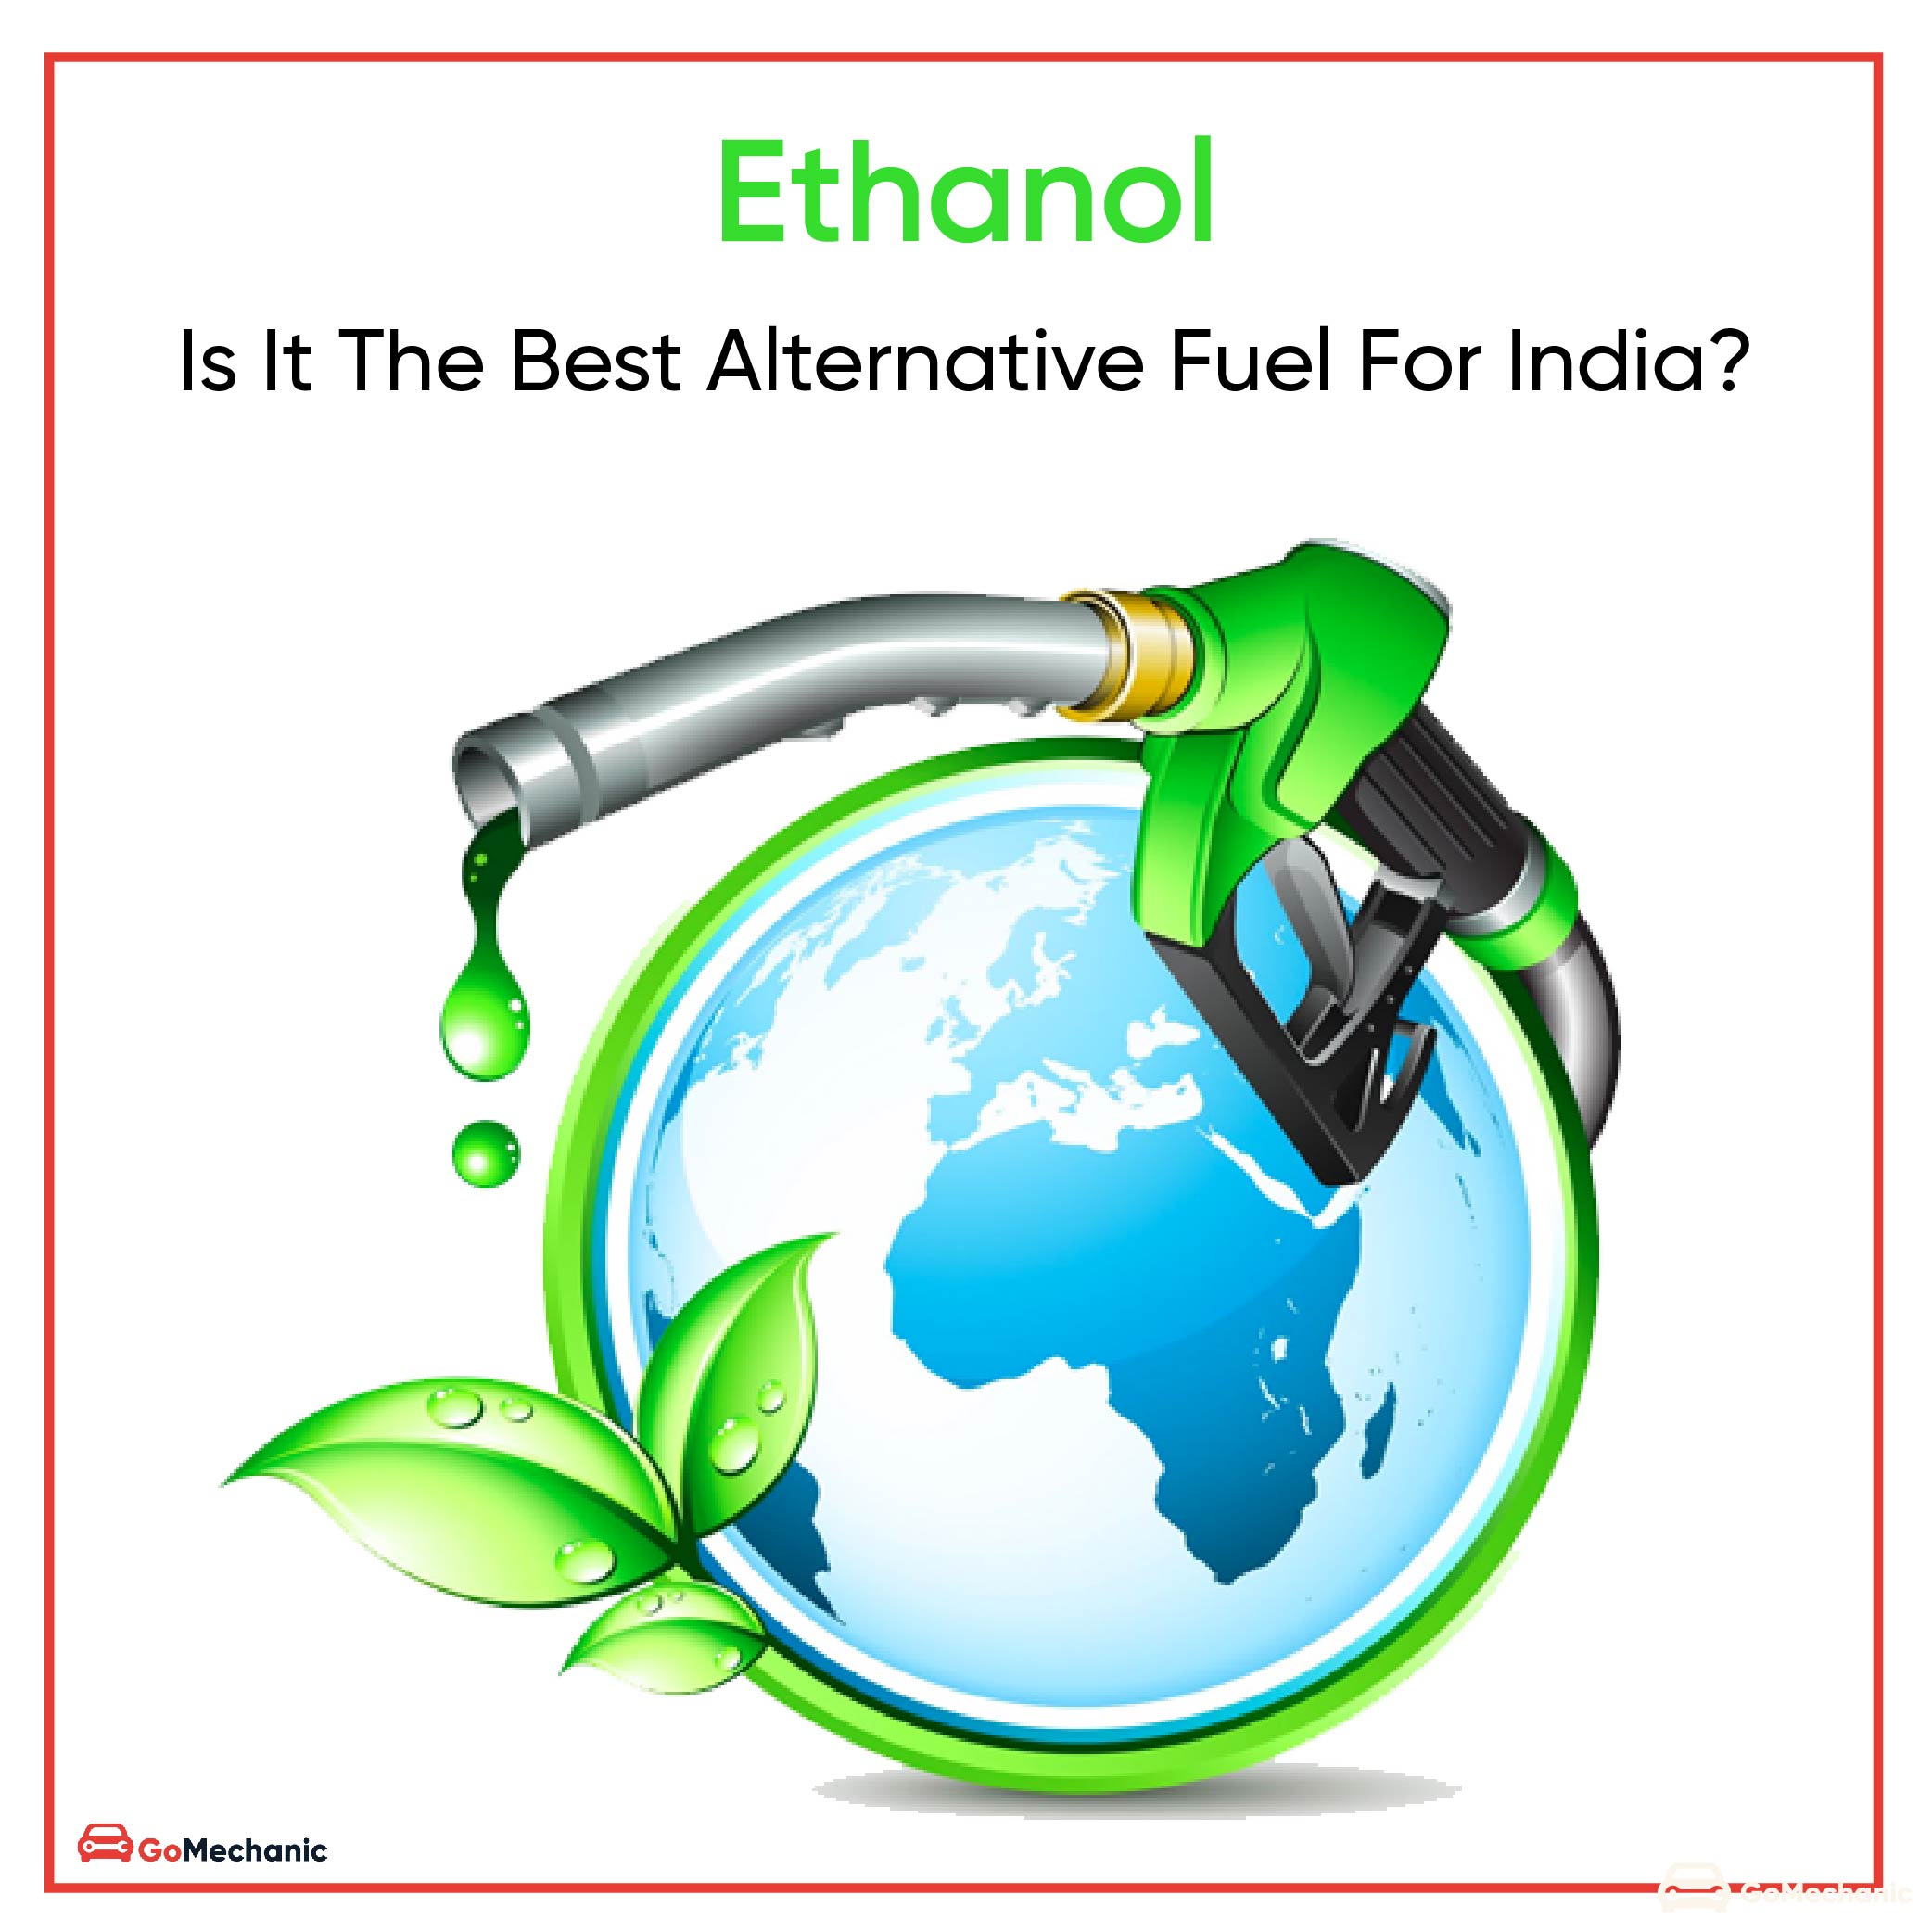 Ethanol Fuel | Is It The Best Alternative Fuel For India?